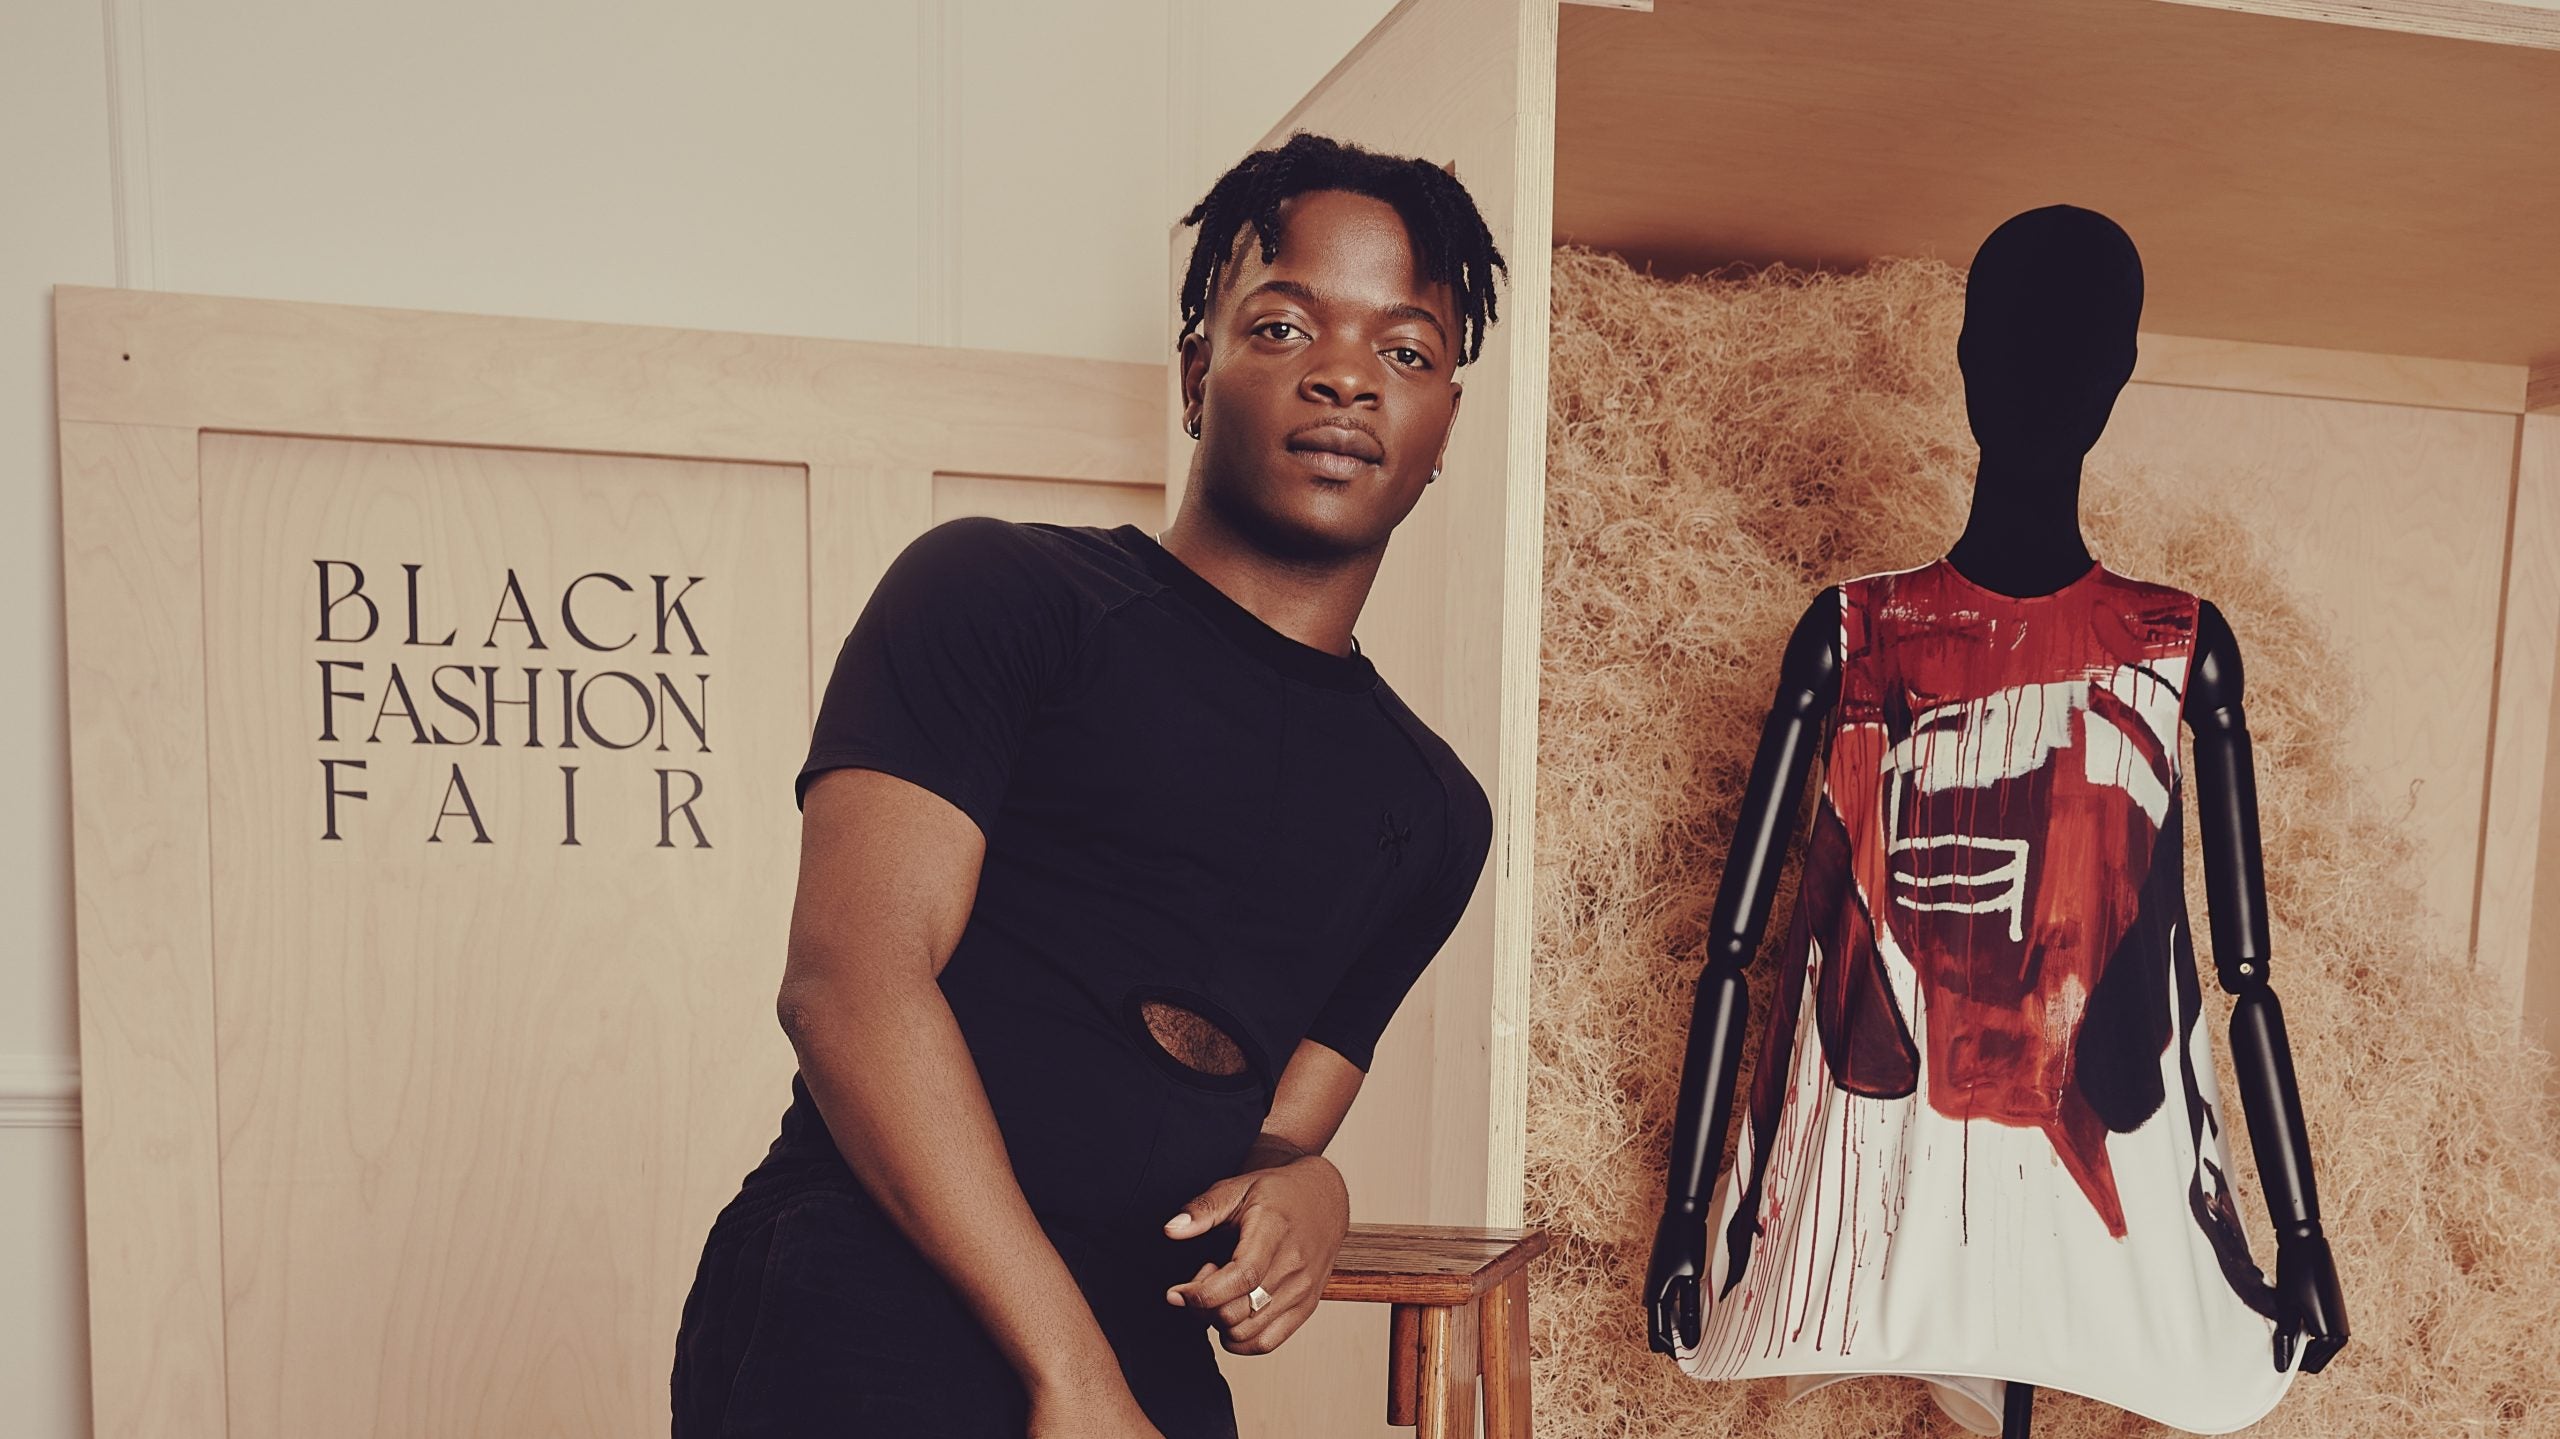 Those Who Dress Better: Black Fashion Fair Celebrates The Style And Legacy Of Jean-Michel Basquiat